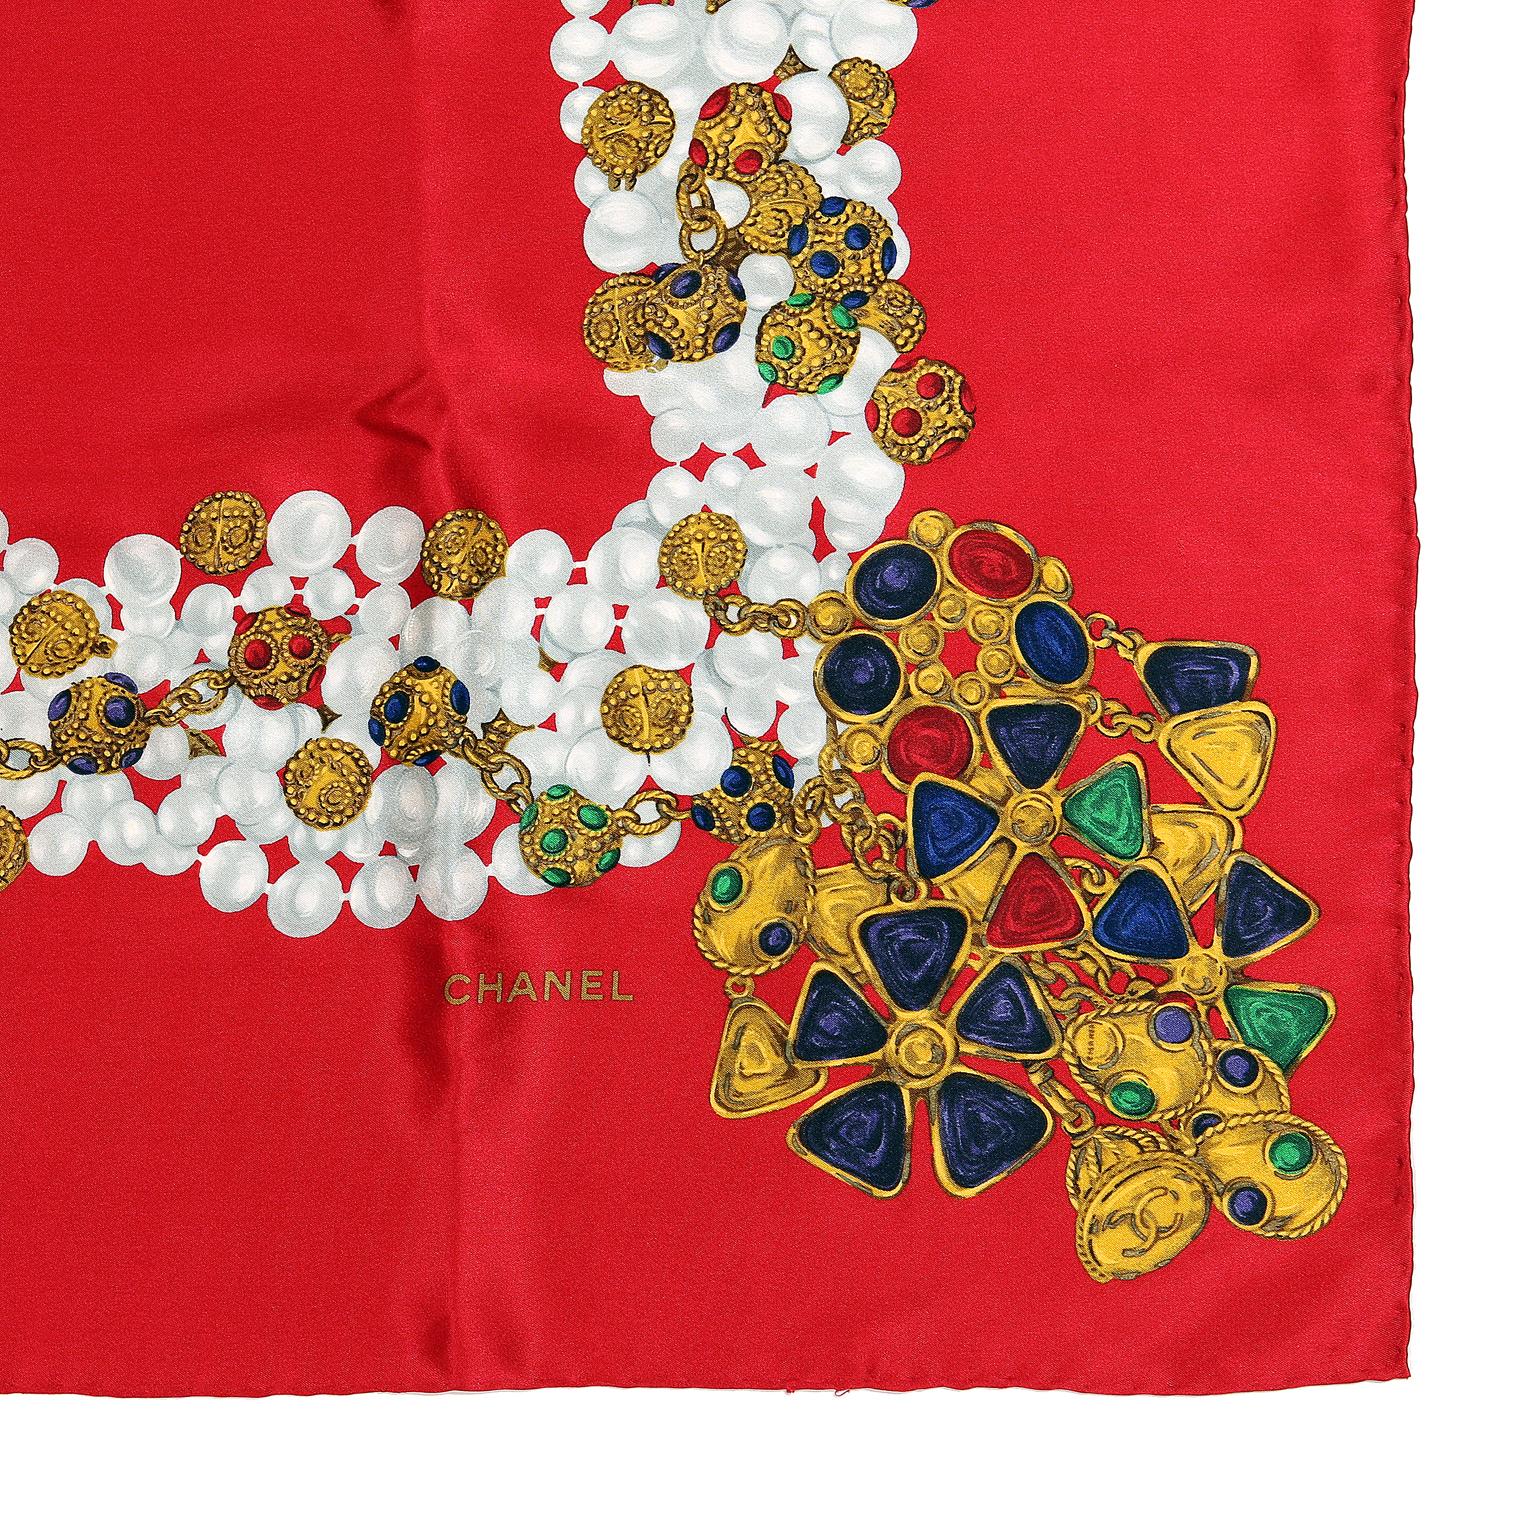 Chanel Red Silk Gripoix Scarf - Pristine
Bright red background features a pearl and jewel encrusted Chanel costume necklace.
Measurements:  34” x 34”
A406